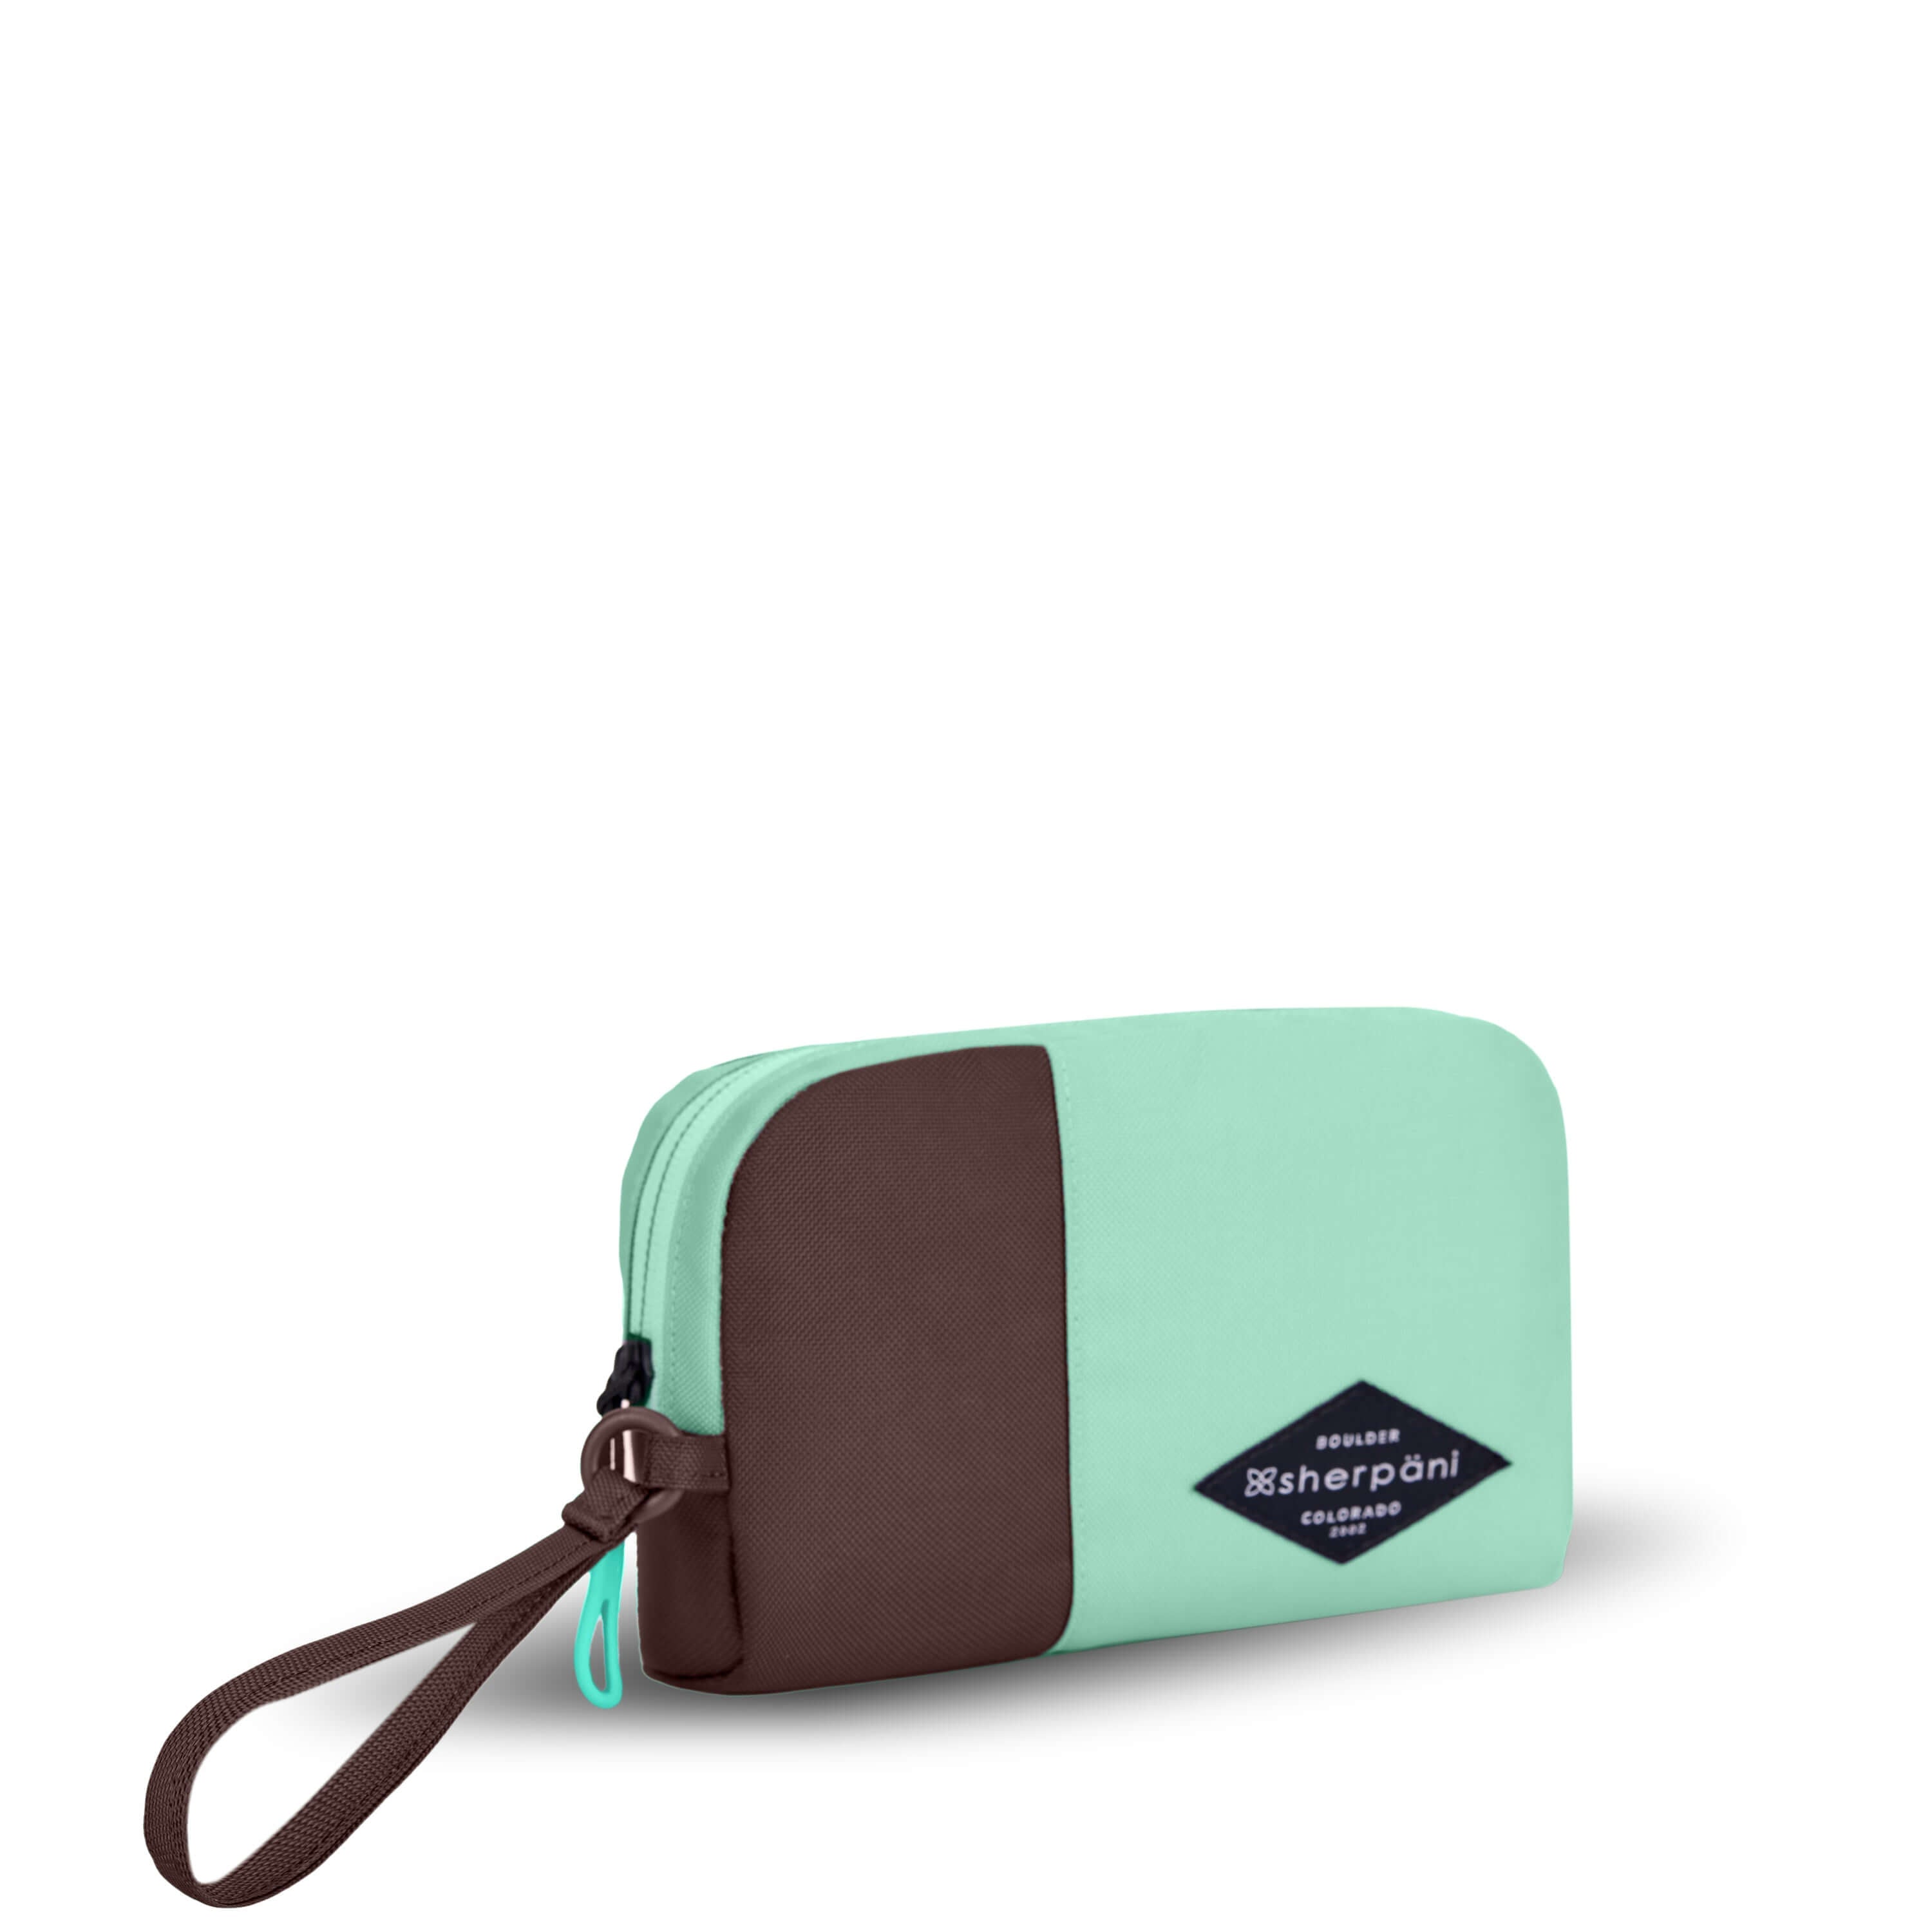 Angled front view of Sherpani travel accessory, the Jolie in Seagreen, in medium size. The pouch is two-toned in light green and brown. It features a brown wristlet strap and an easy-pull zipper accented in light green.